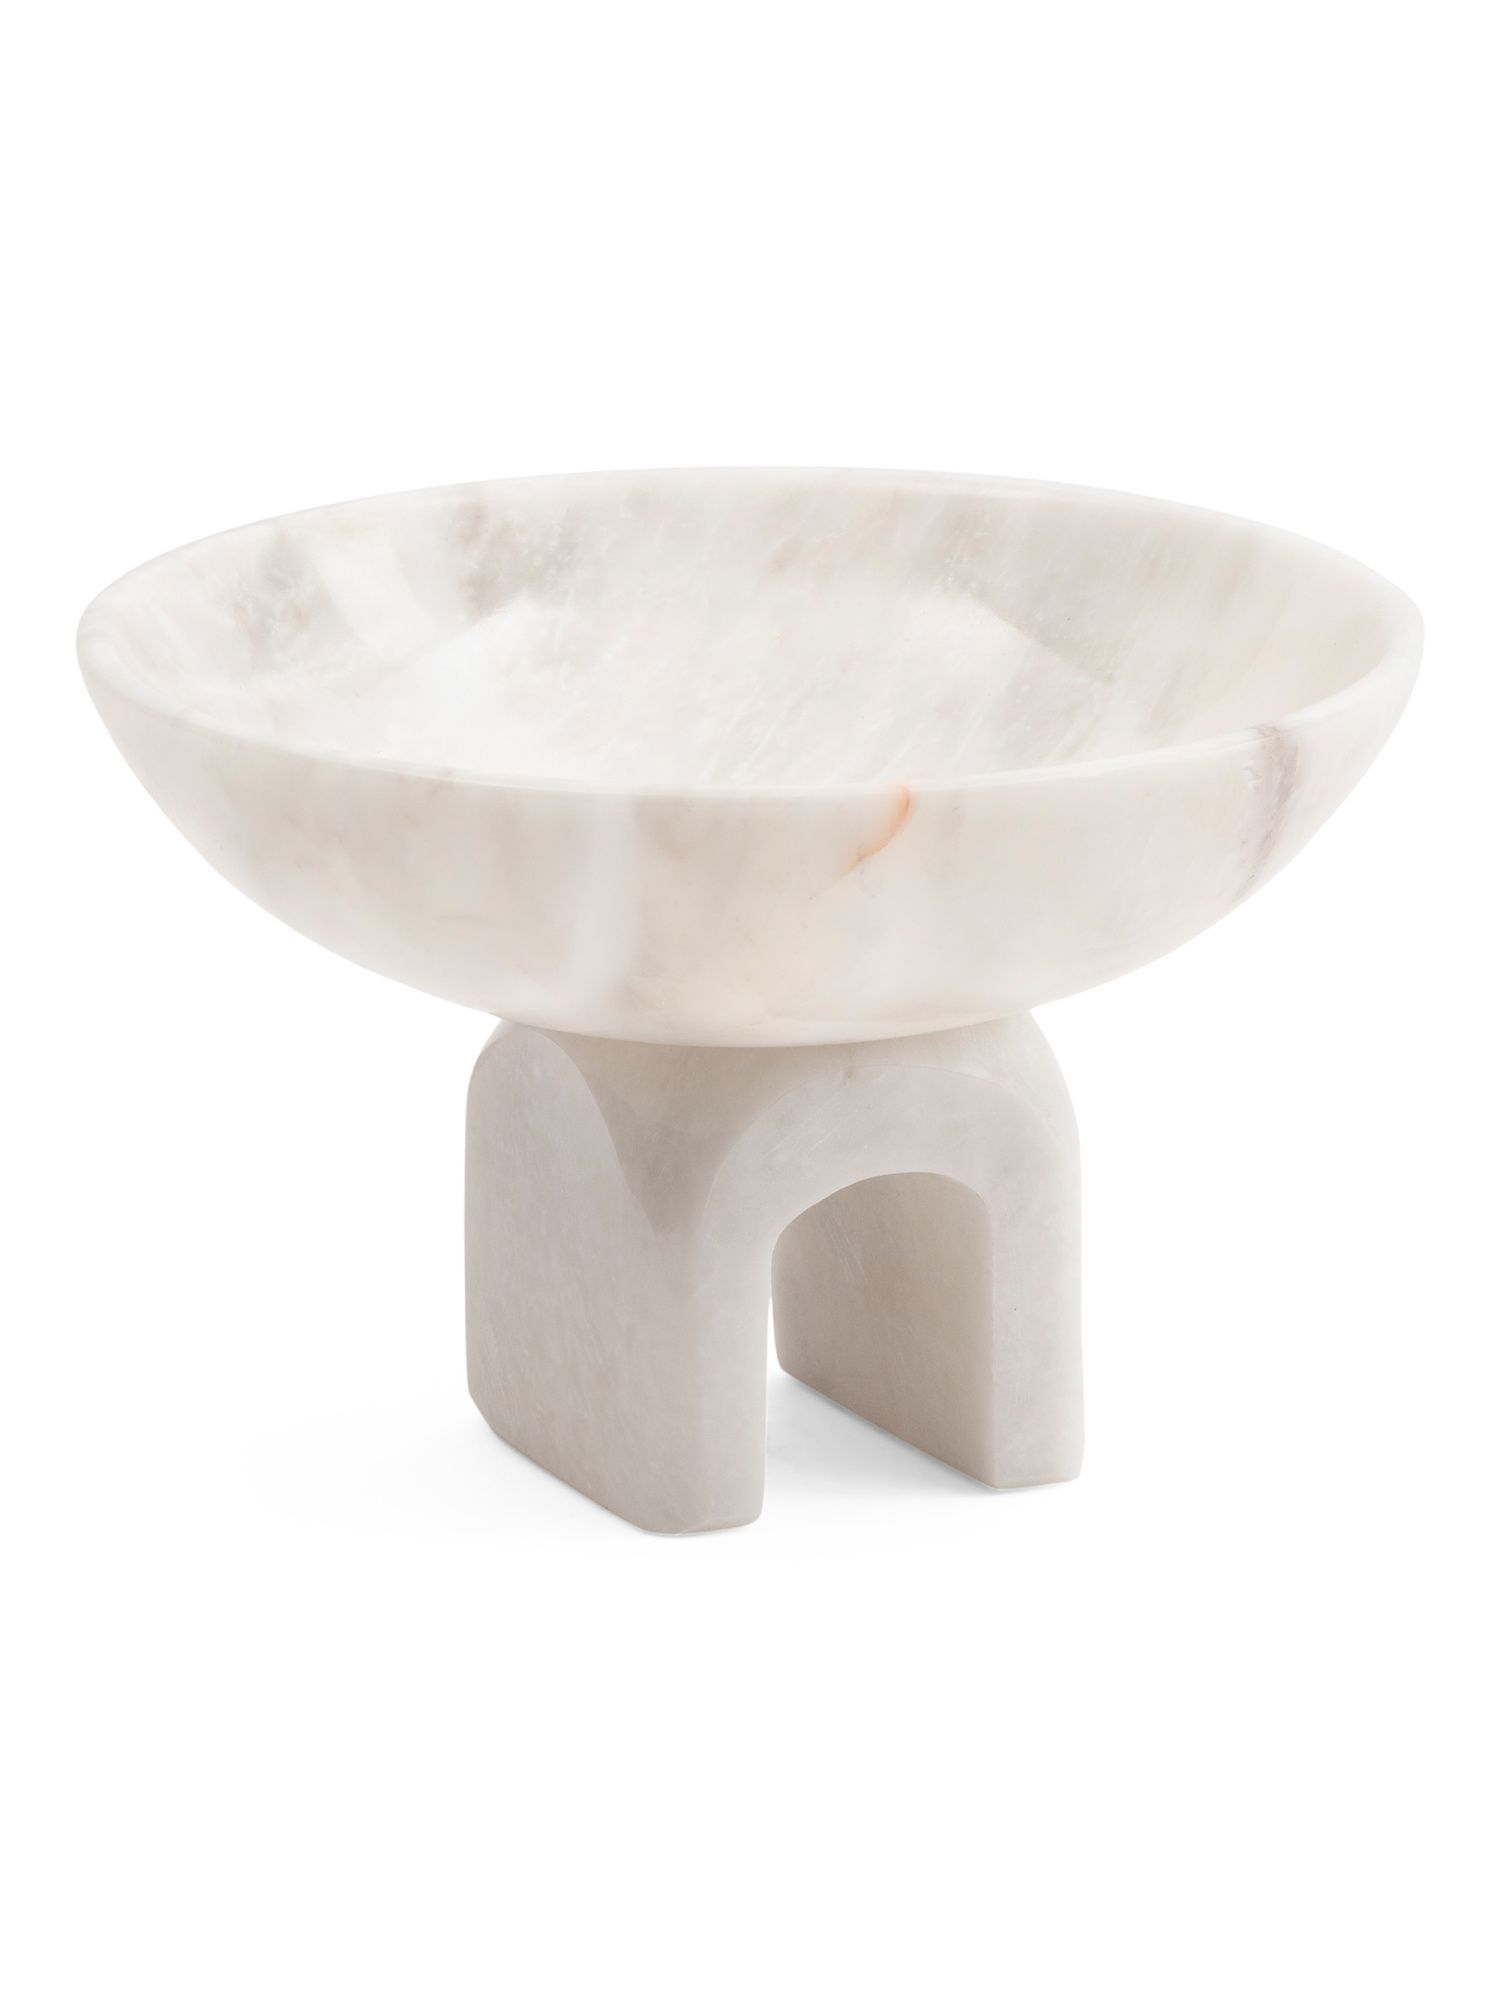 9x5 Solid Marble Footed Bowl | TJ Maxx